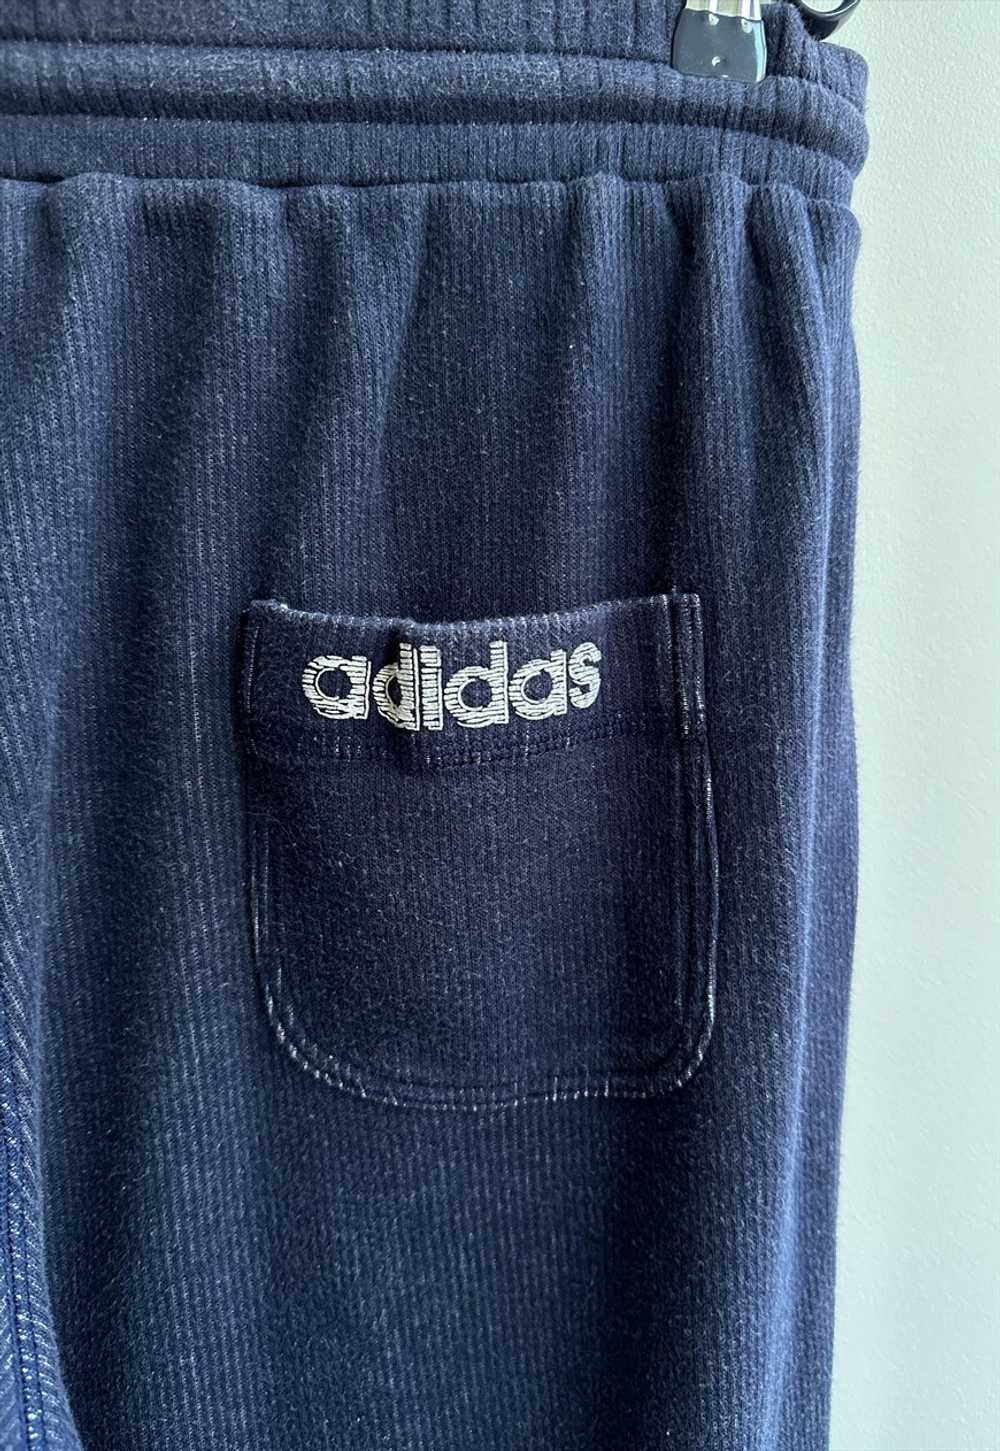 Vintage Adidas 90s Relaxed Fit Sweatpants Size L - image 5